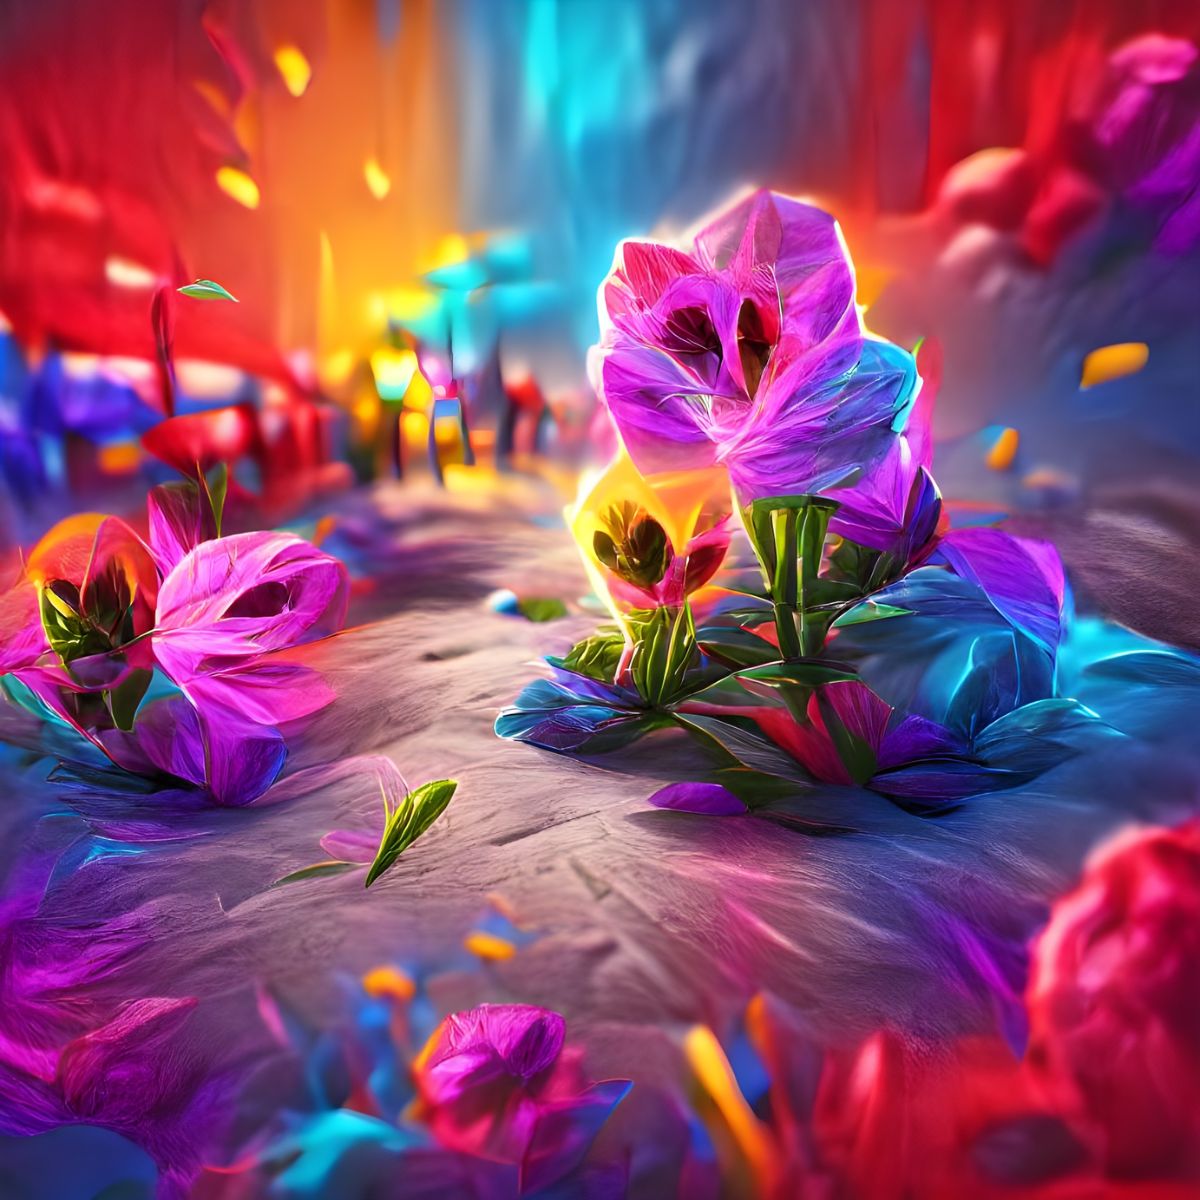 NFTS of neon flowers featured